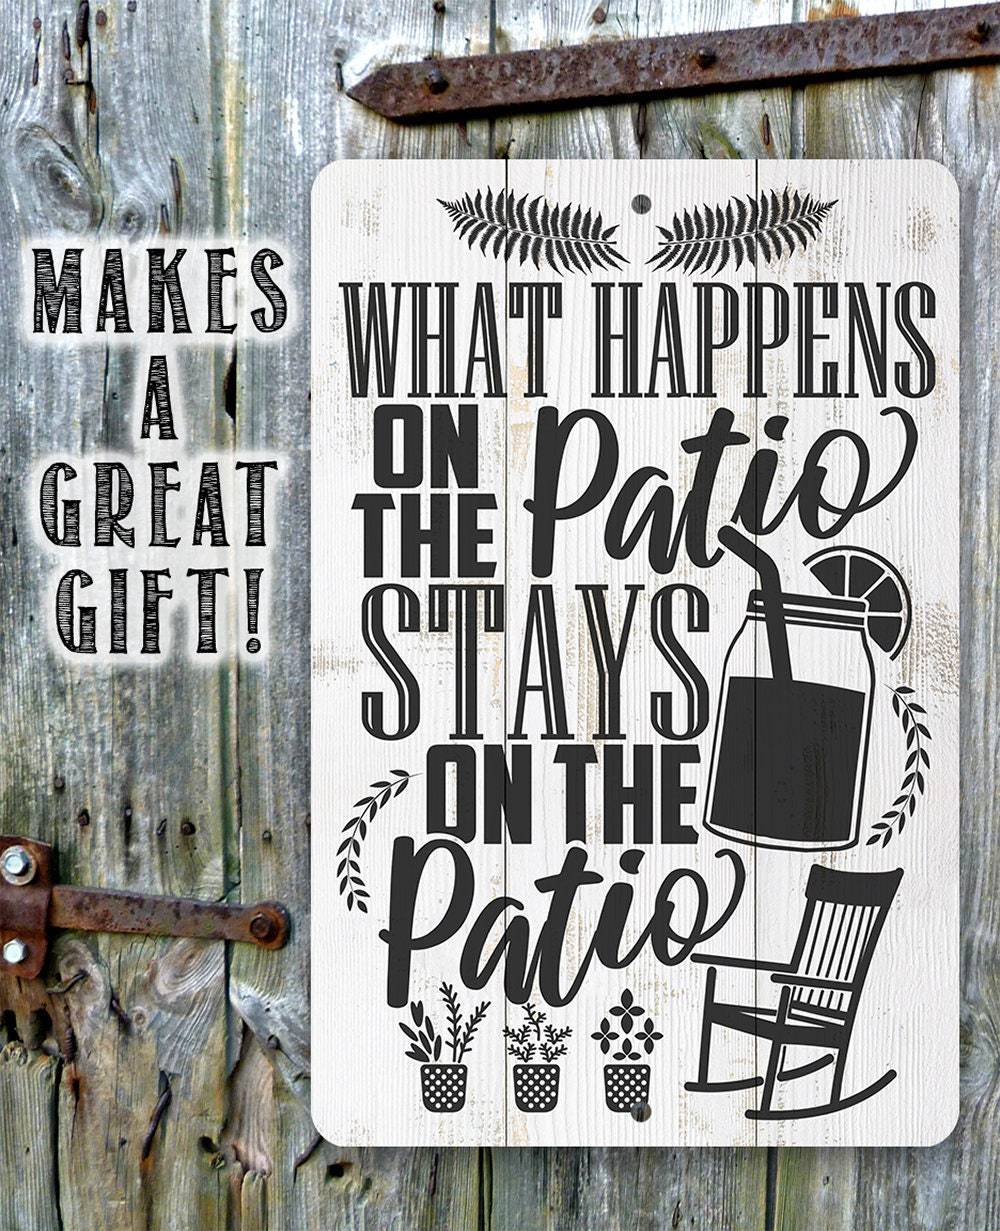 What Happens On The Patio Stays - Metal Sign | Lone Star Art.